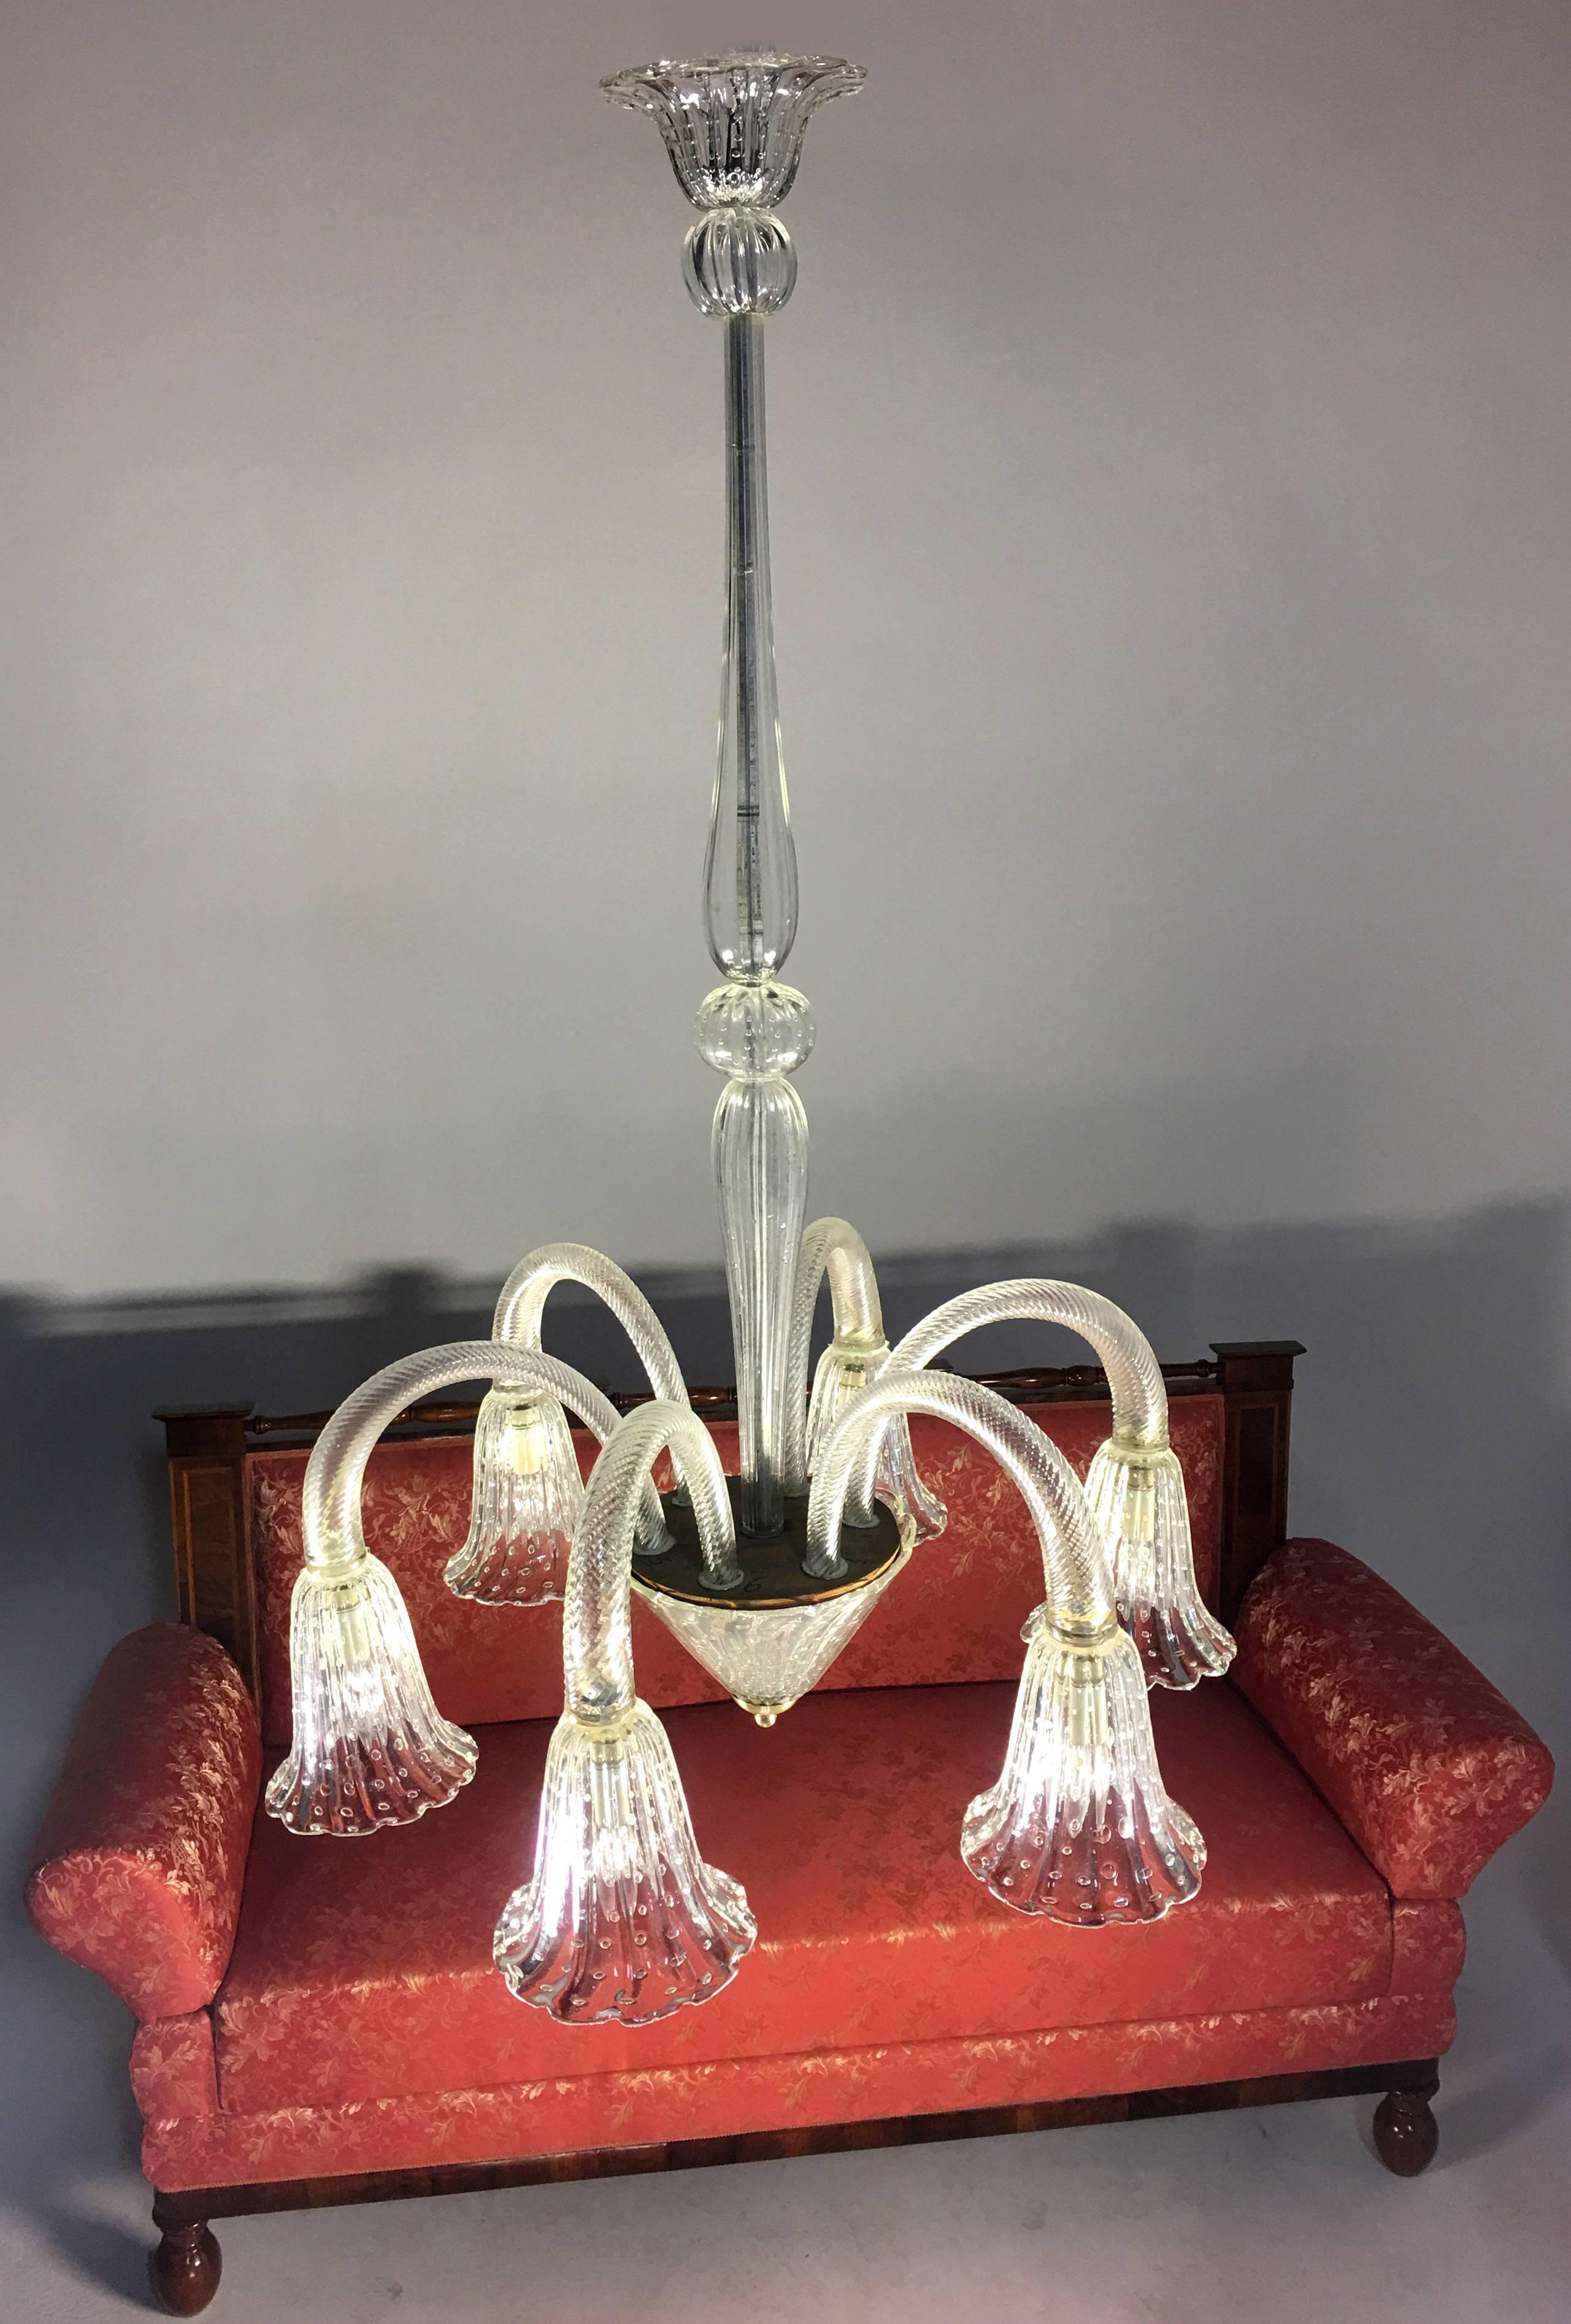 20th Century Luxurious Chandelier by Ercole Barovier, Murano, 1940s